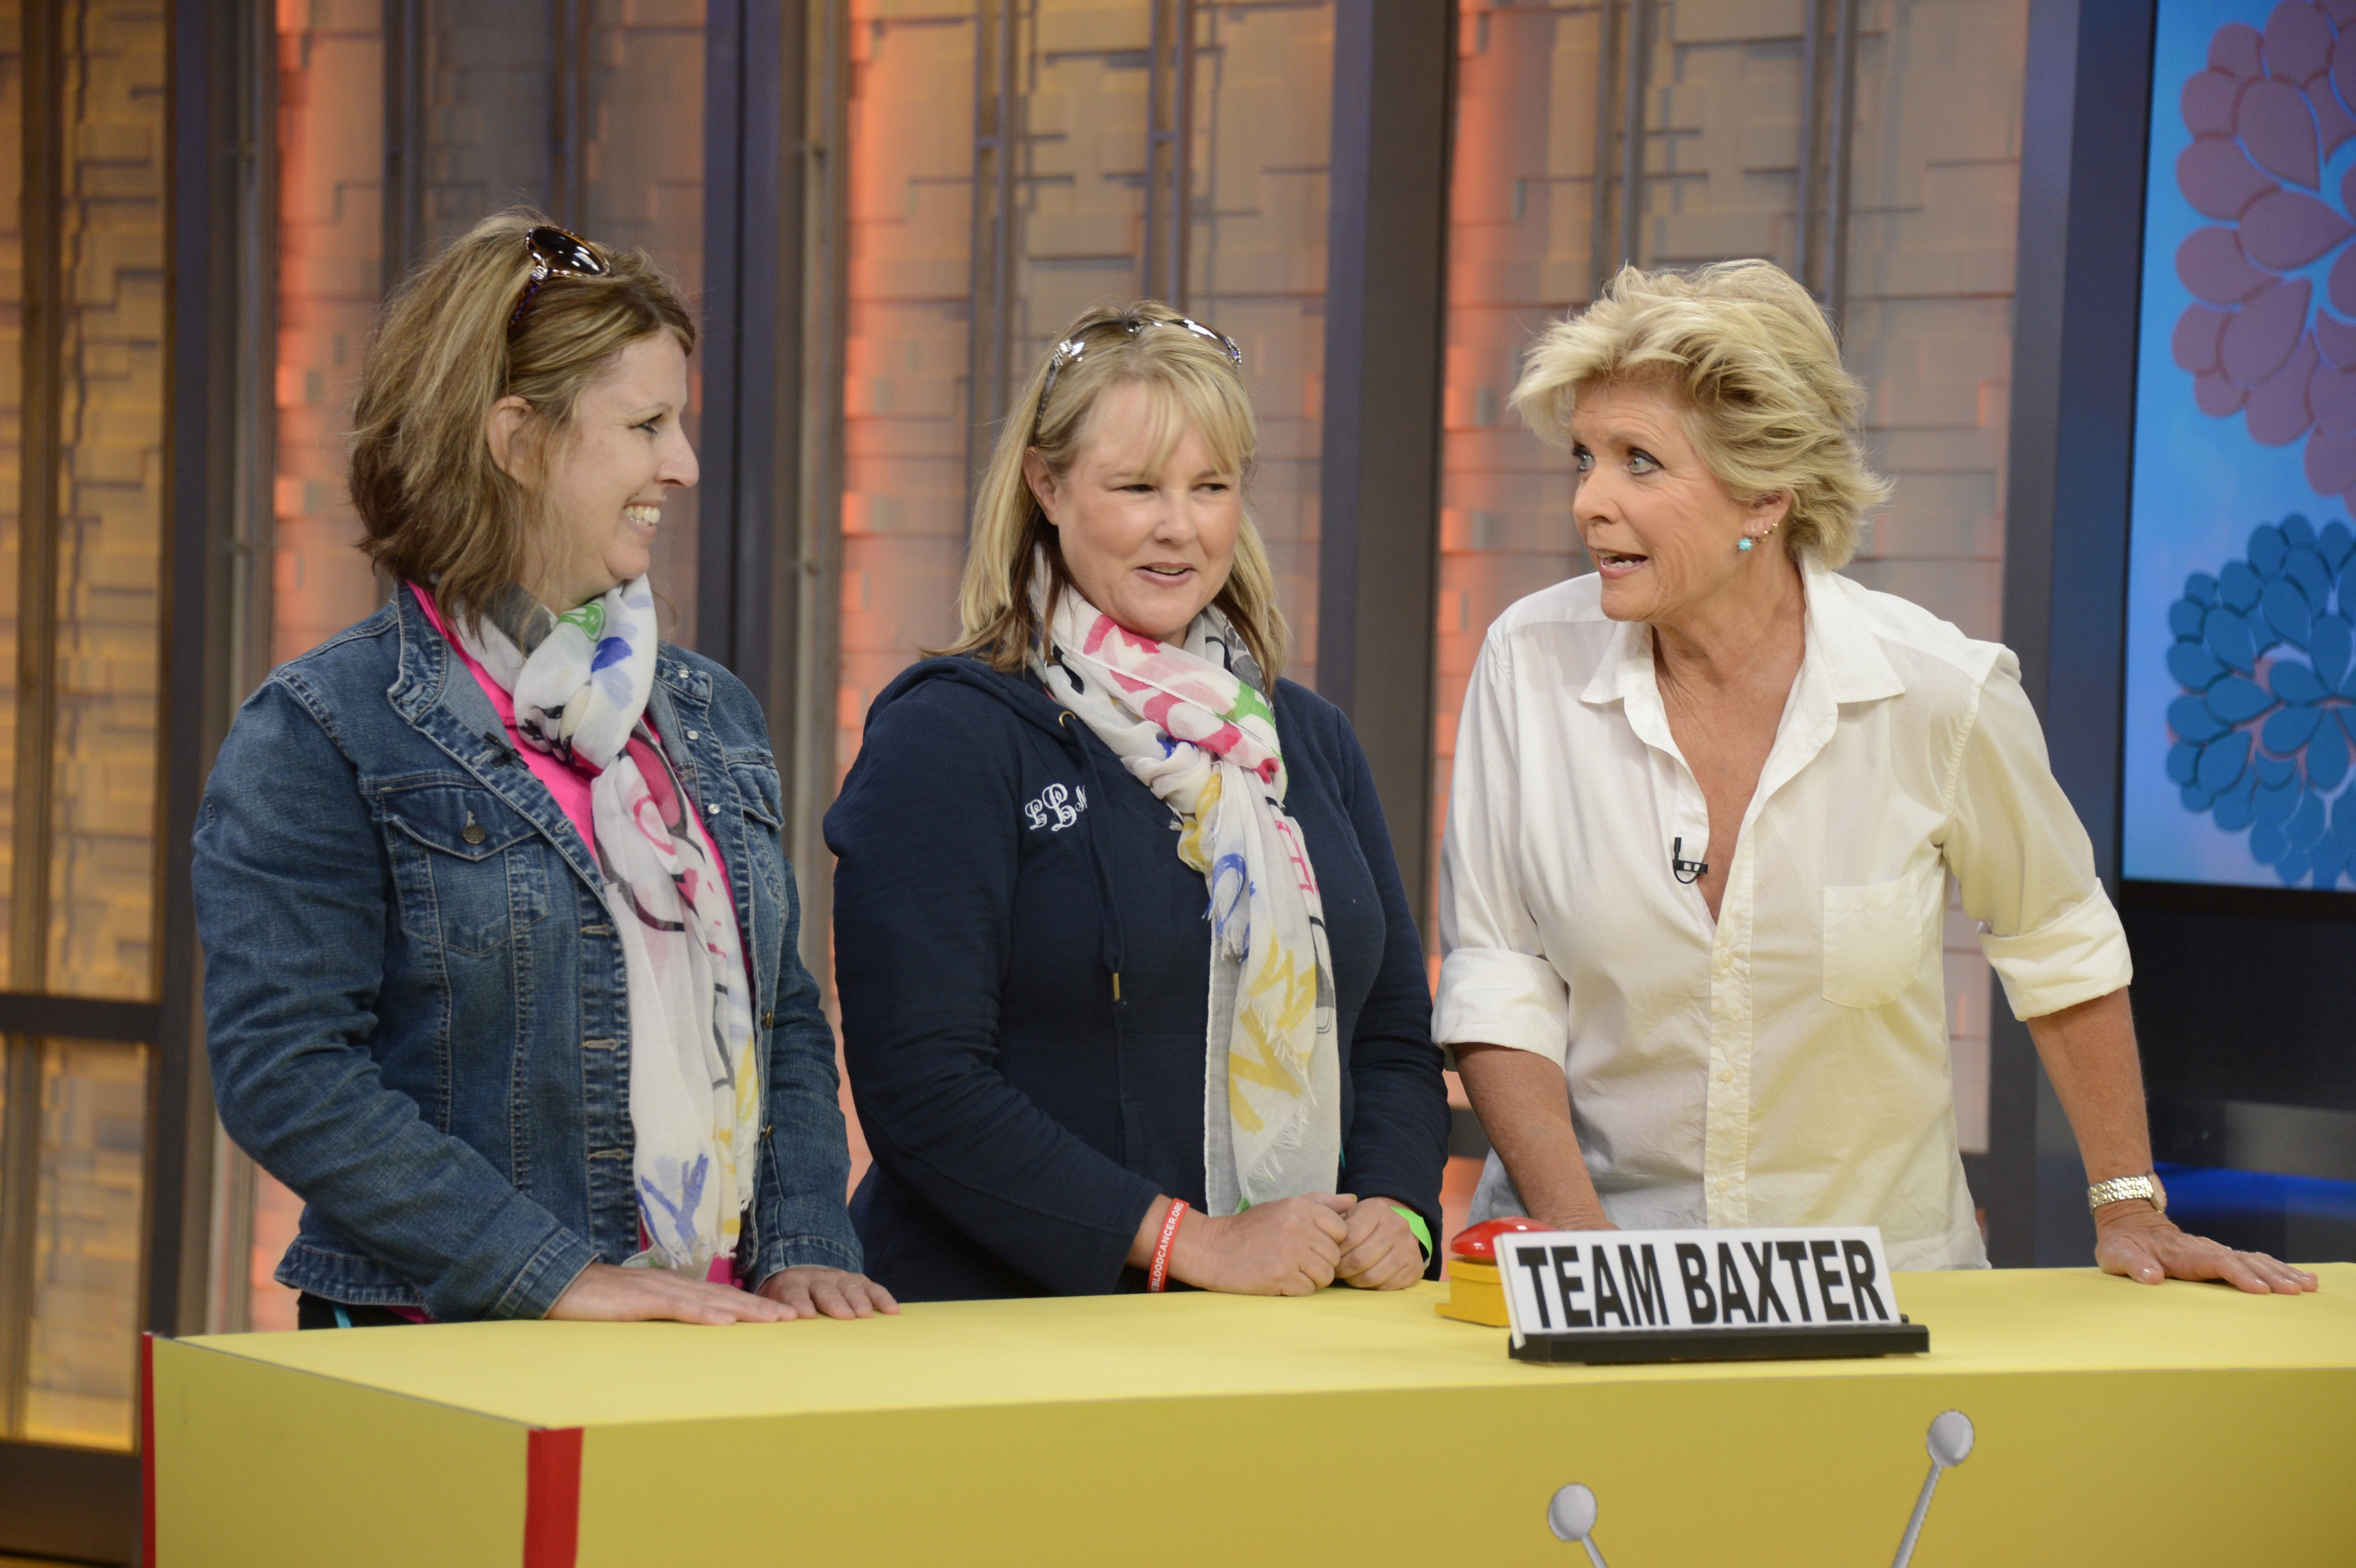 TV Moms Meredith Baxter and Jo Marie Payton compete with audience members in a trivia contest on "Good Morning America" on May 16, 2015. | Source: Getty Images